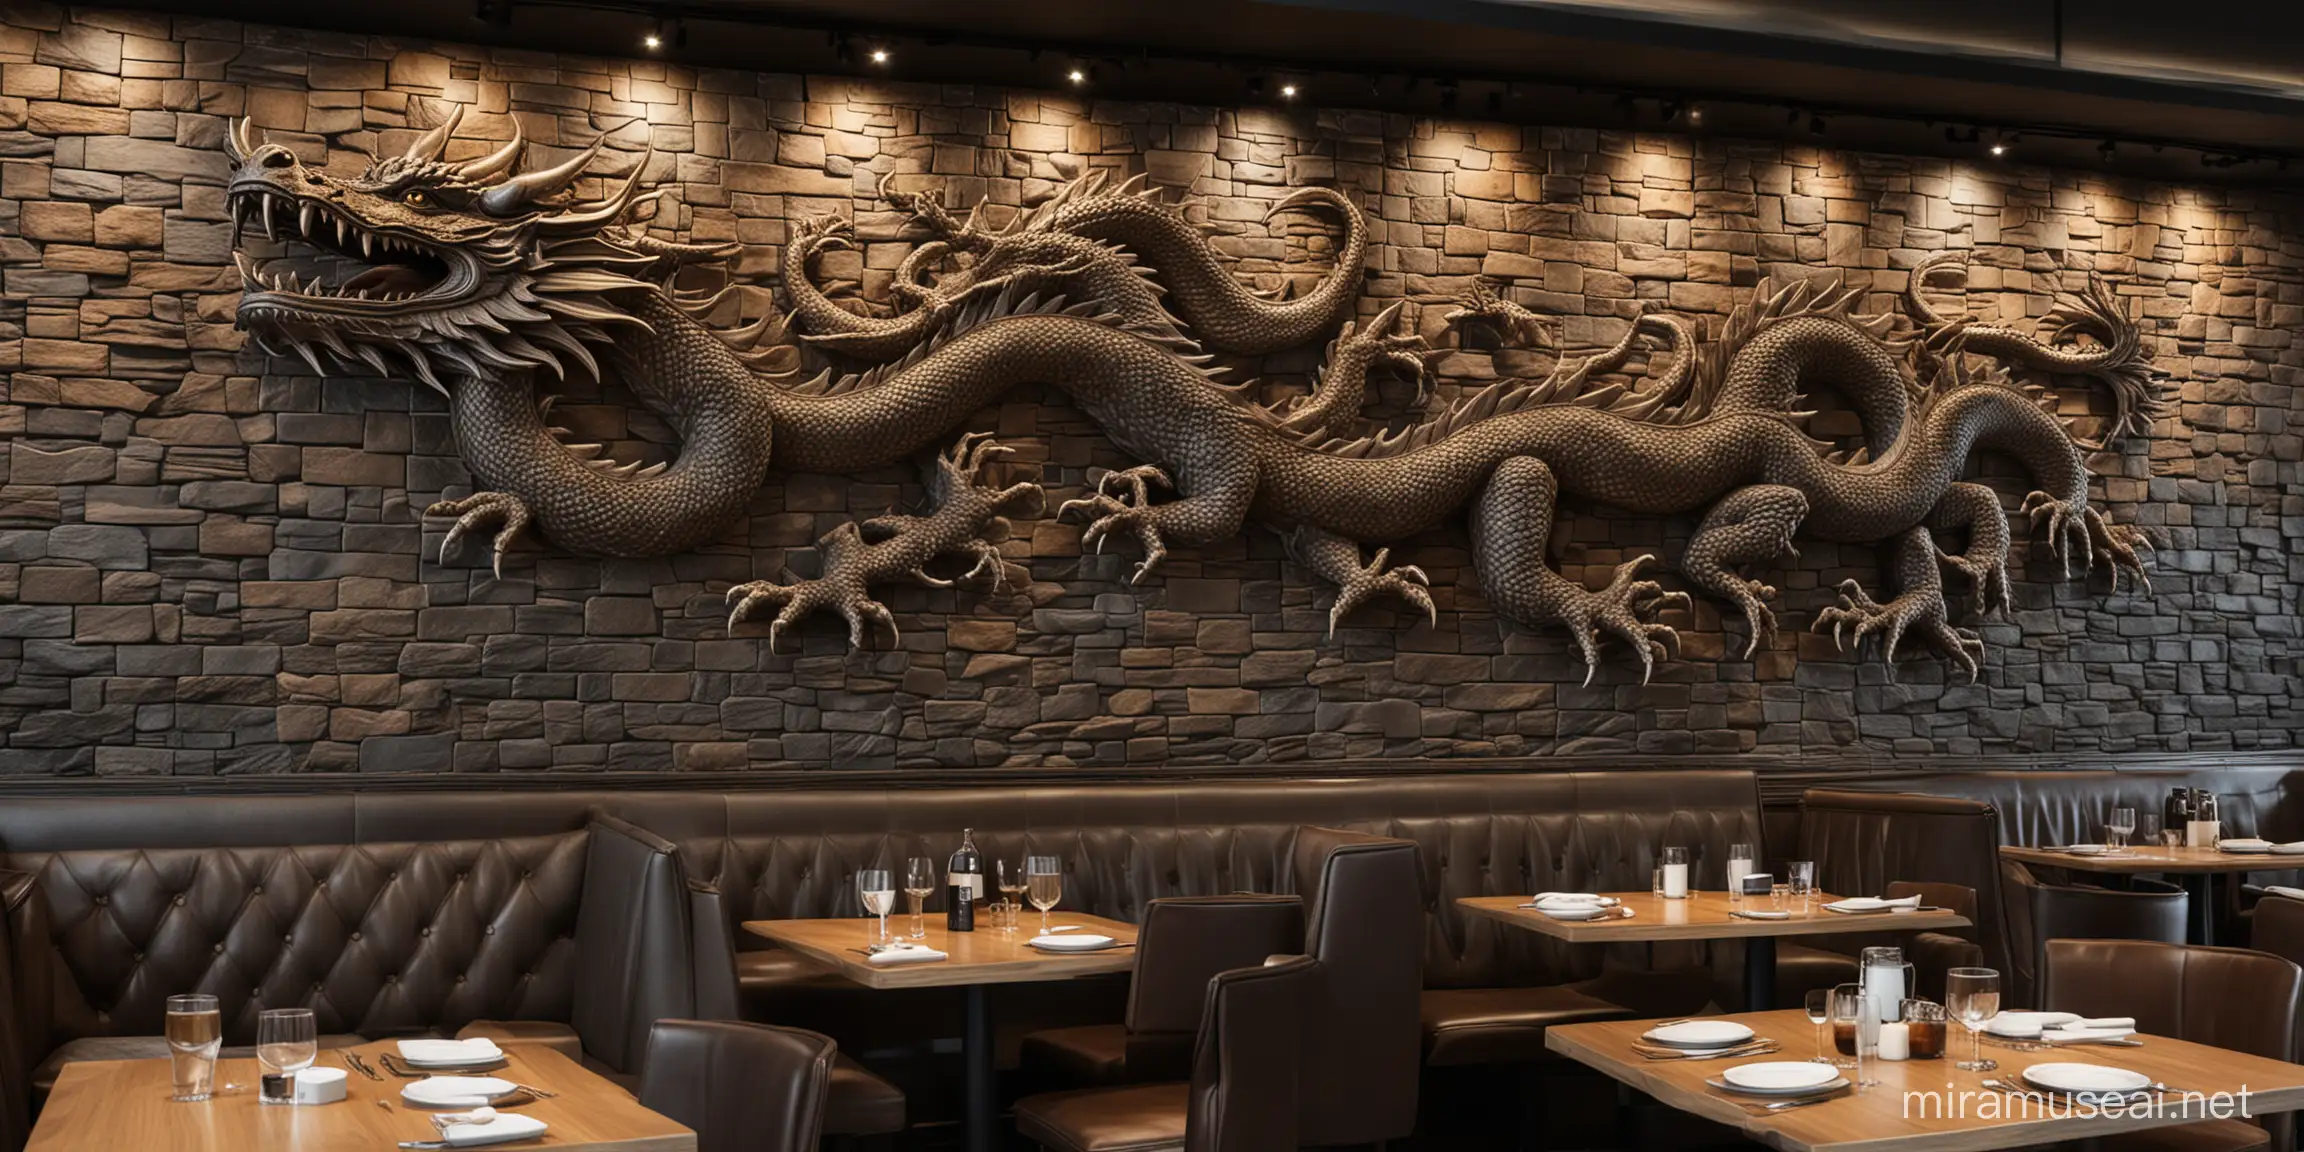 Modern Caf with Intricate Dragon Wall Mural